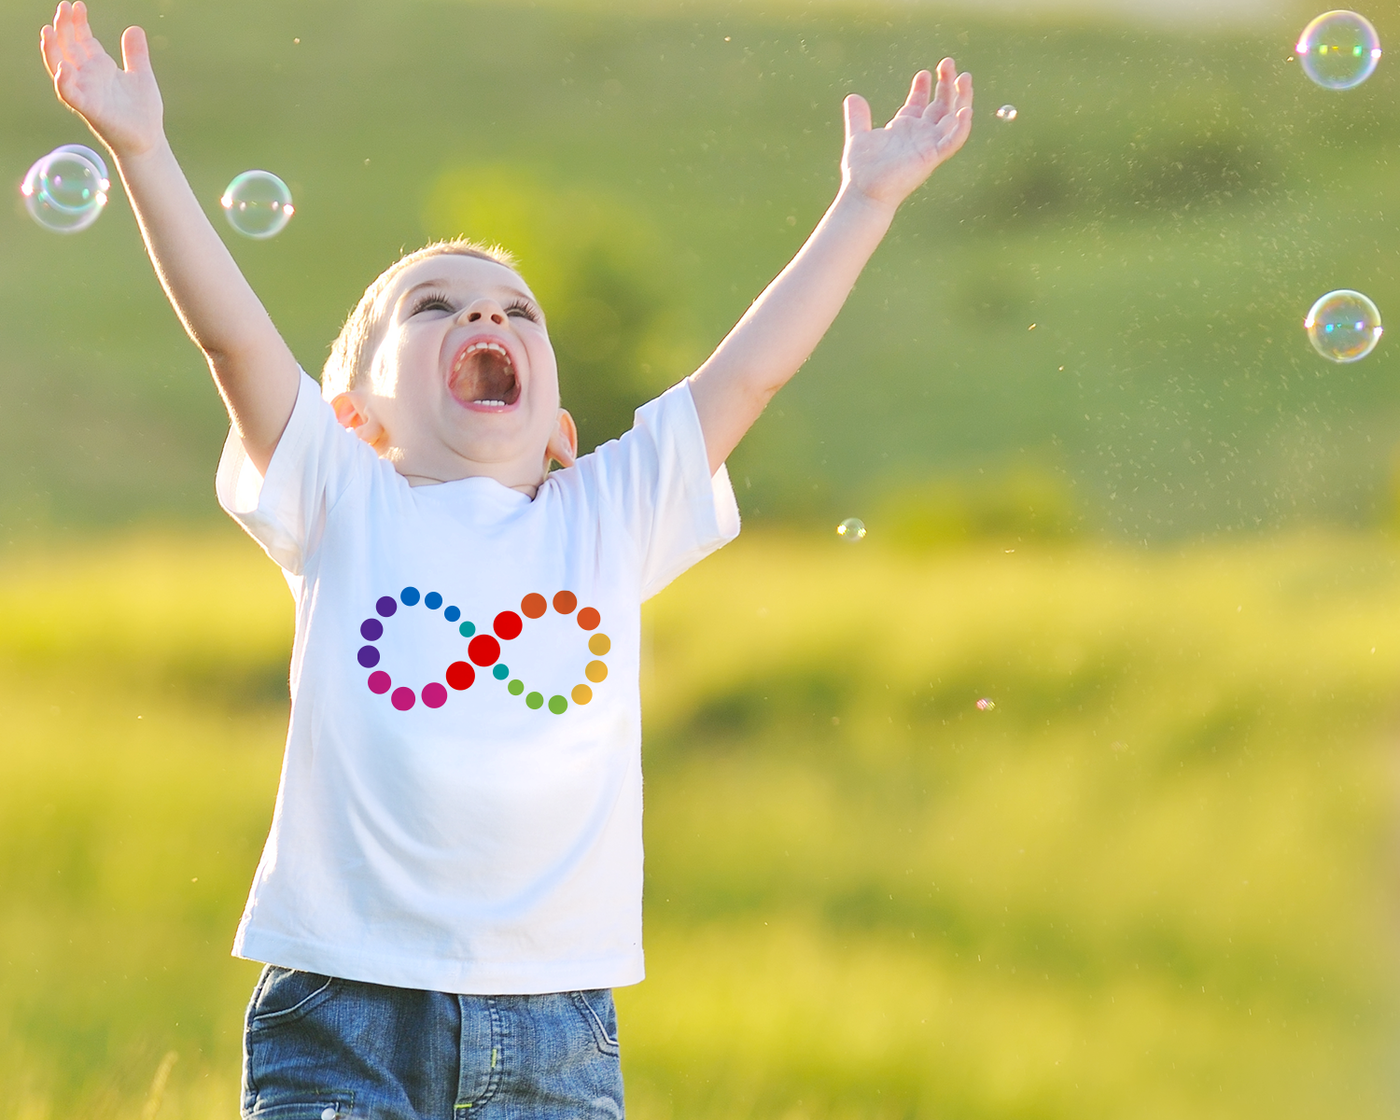 A laughing white child with arms raised chases bubbles outside. He is wearing a white shirt with an infinity symbol design made of circles in rainbow colors.